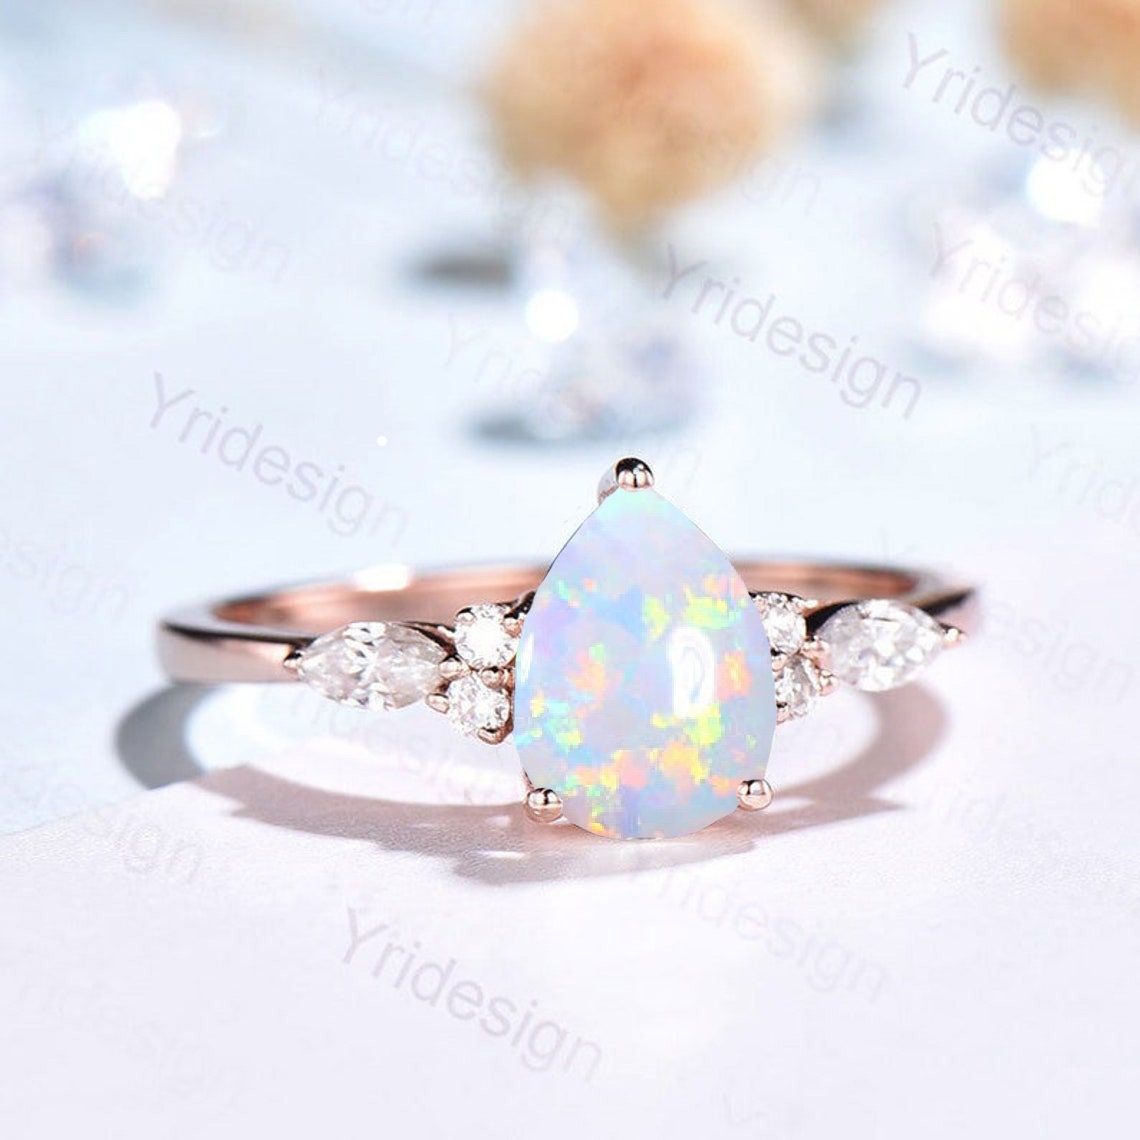 Sale !!! Pear Shaped Opal Ring Rose Gold Unique Cluster Diamond Opal Engagement Ring Teardrop  Bridal Promise Ring Women Anniversary gift - PENFINE